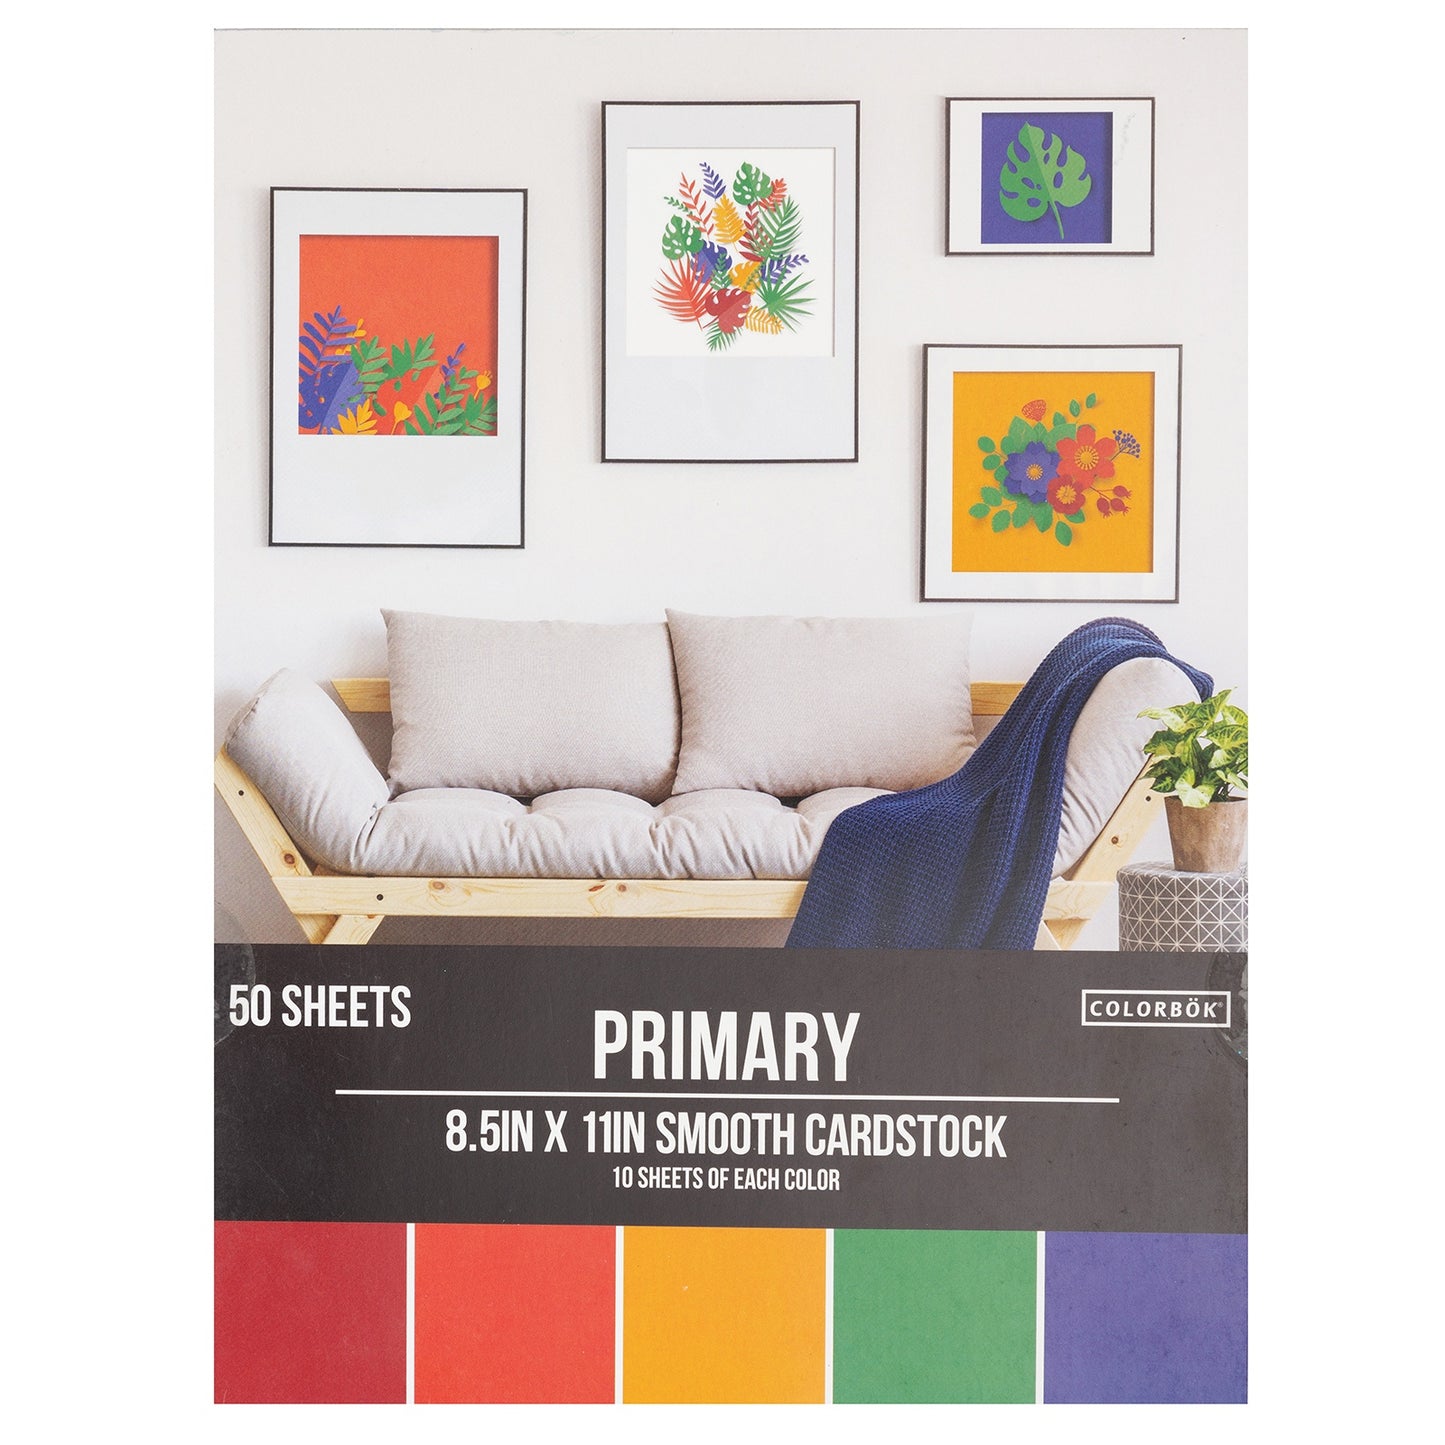 Colorbok 78lb Smooth Cardstock 8.5"X11" 50/Pkg-Primary, 5 Colors/10 Each